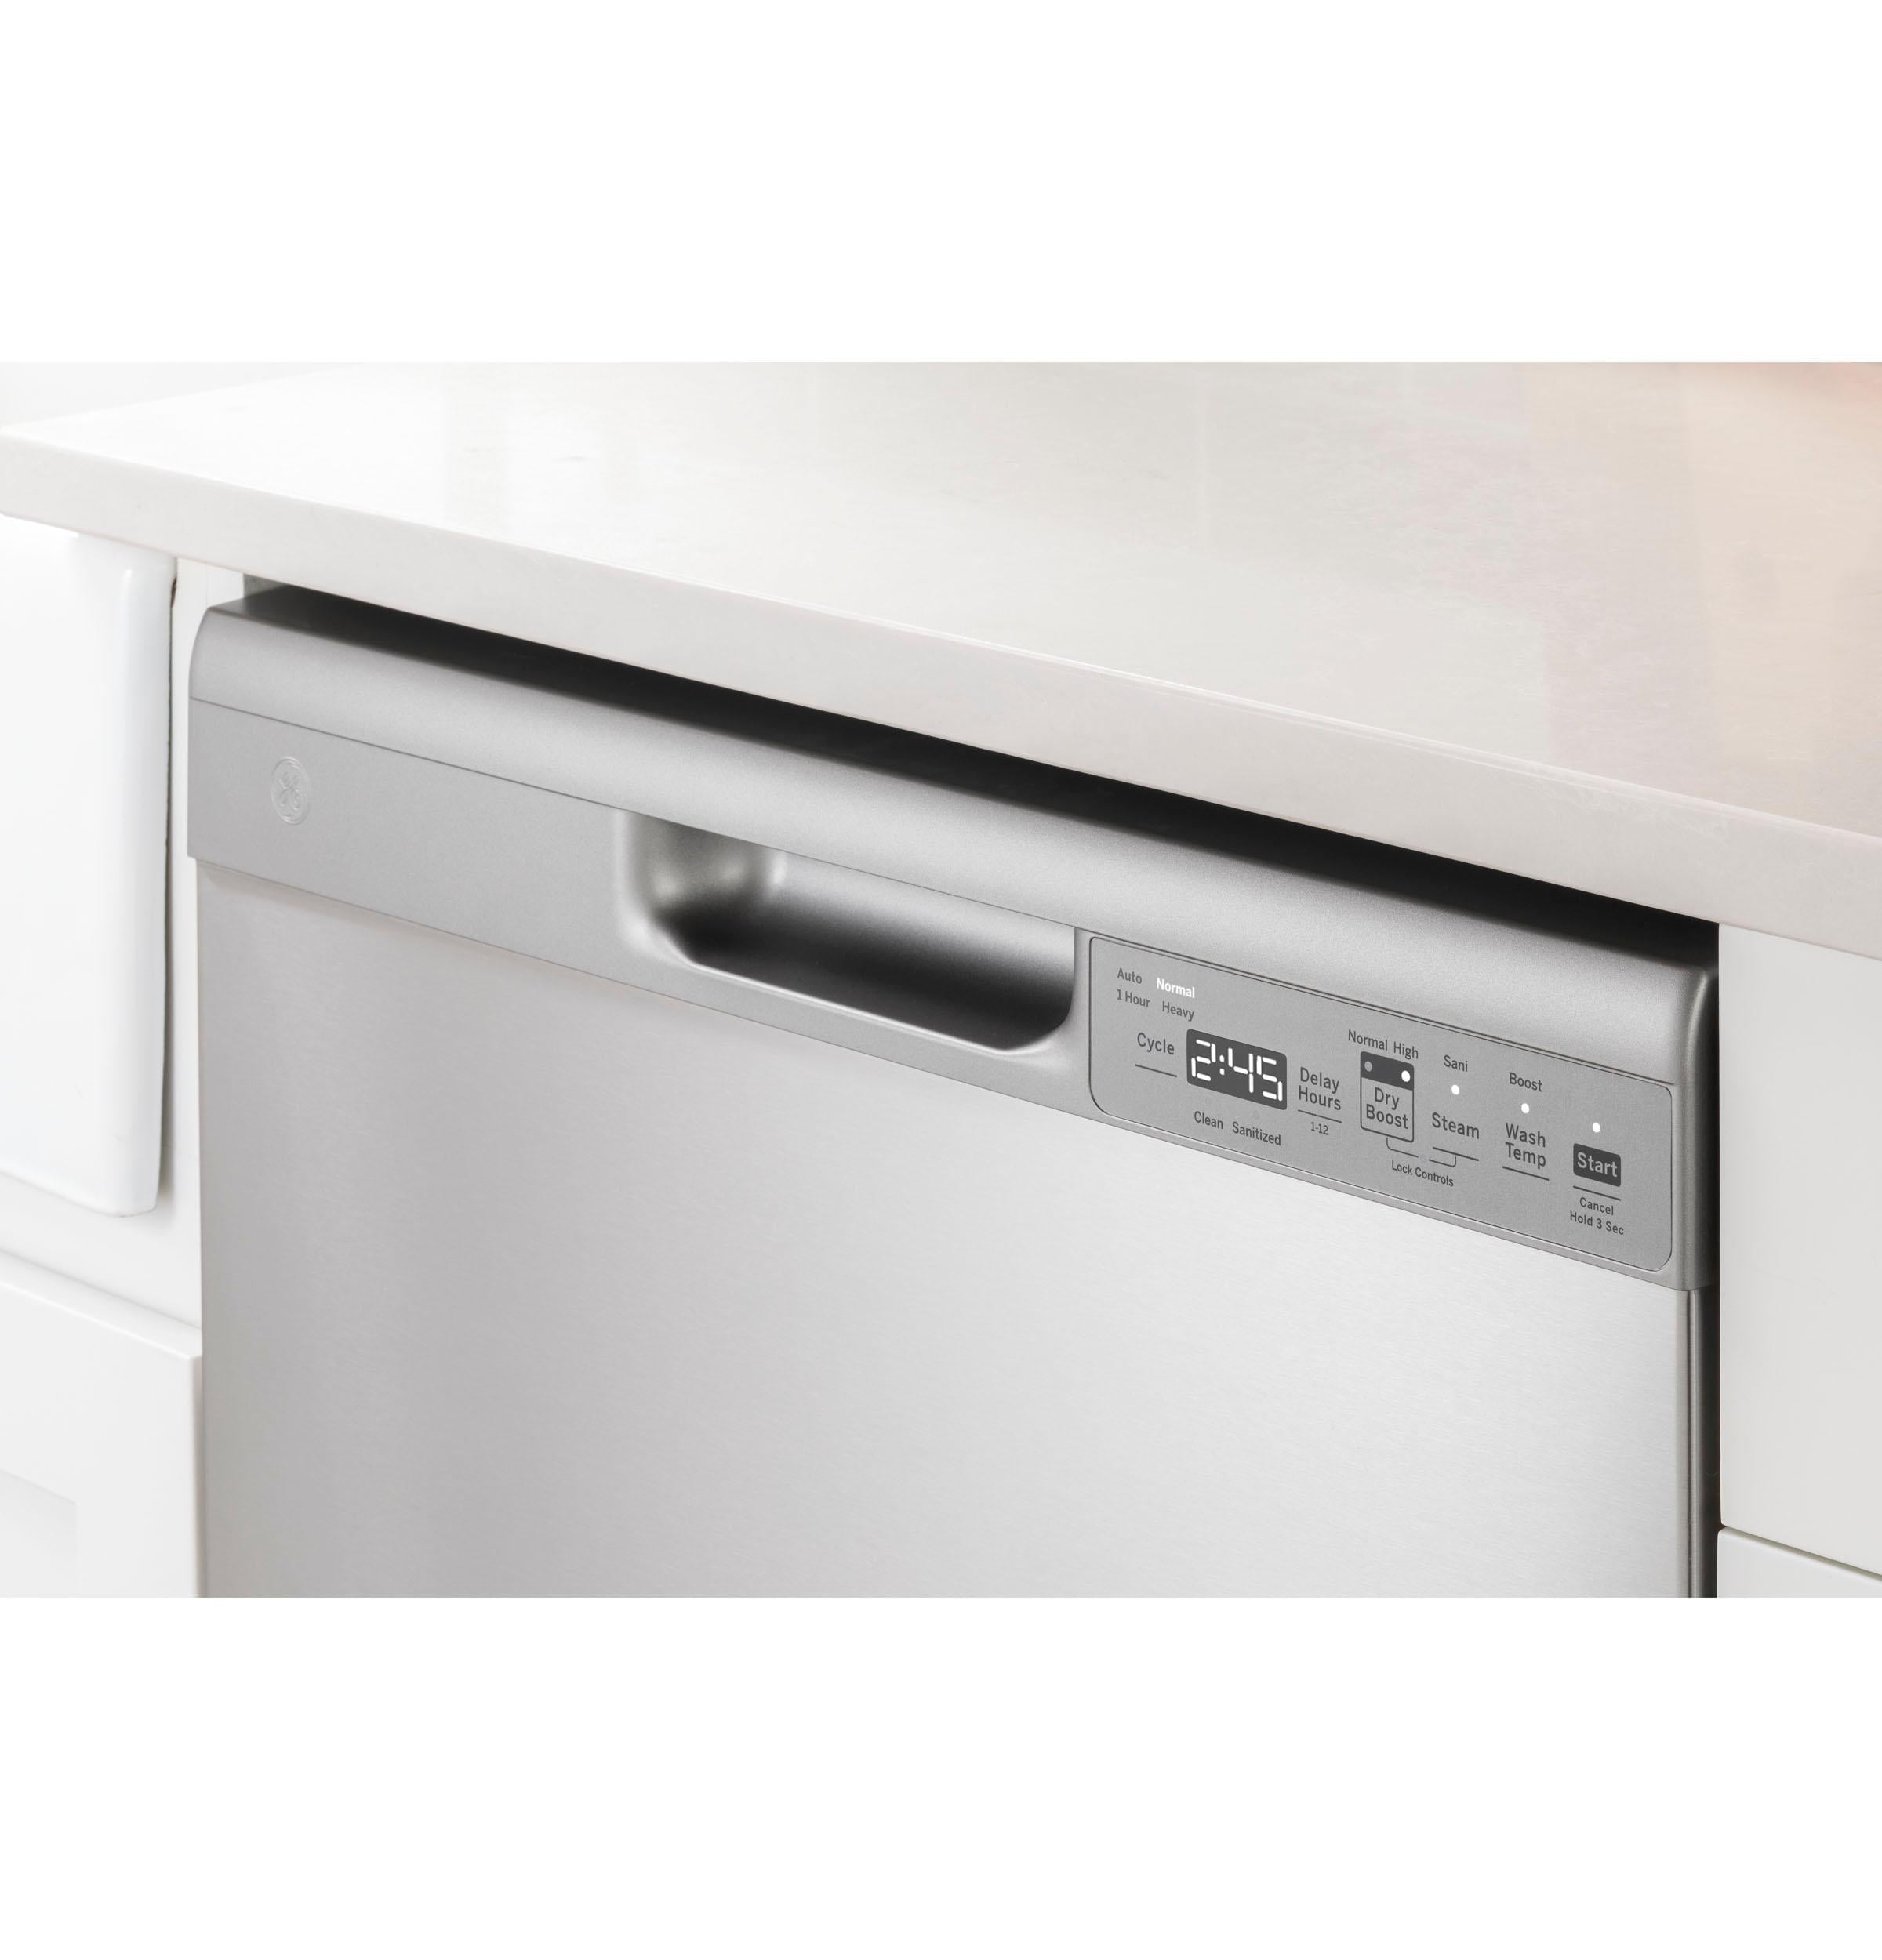 GE® ENERGY STAR® Front Control with Plastic Interior Dishwasher with Sanitize Cycle & Dry Boost